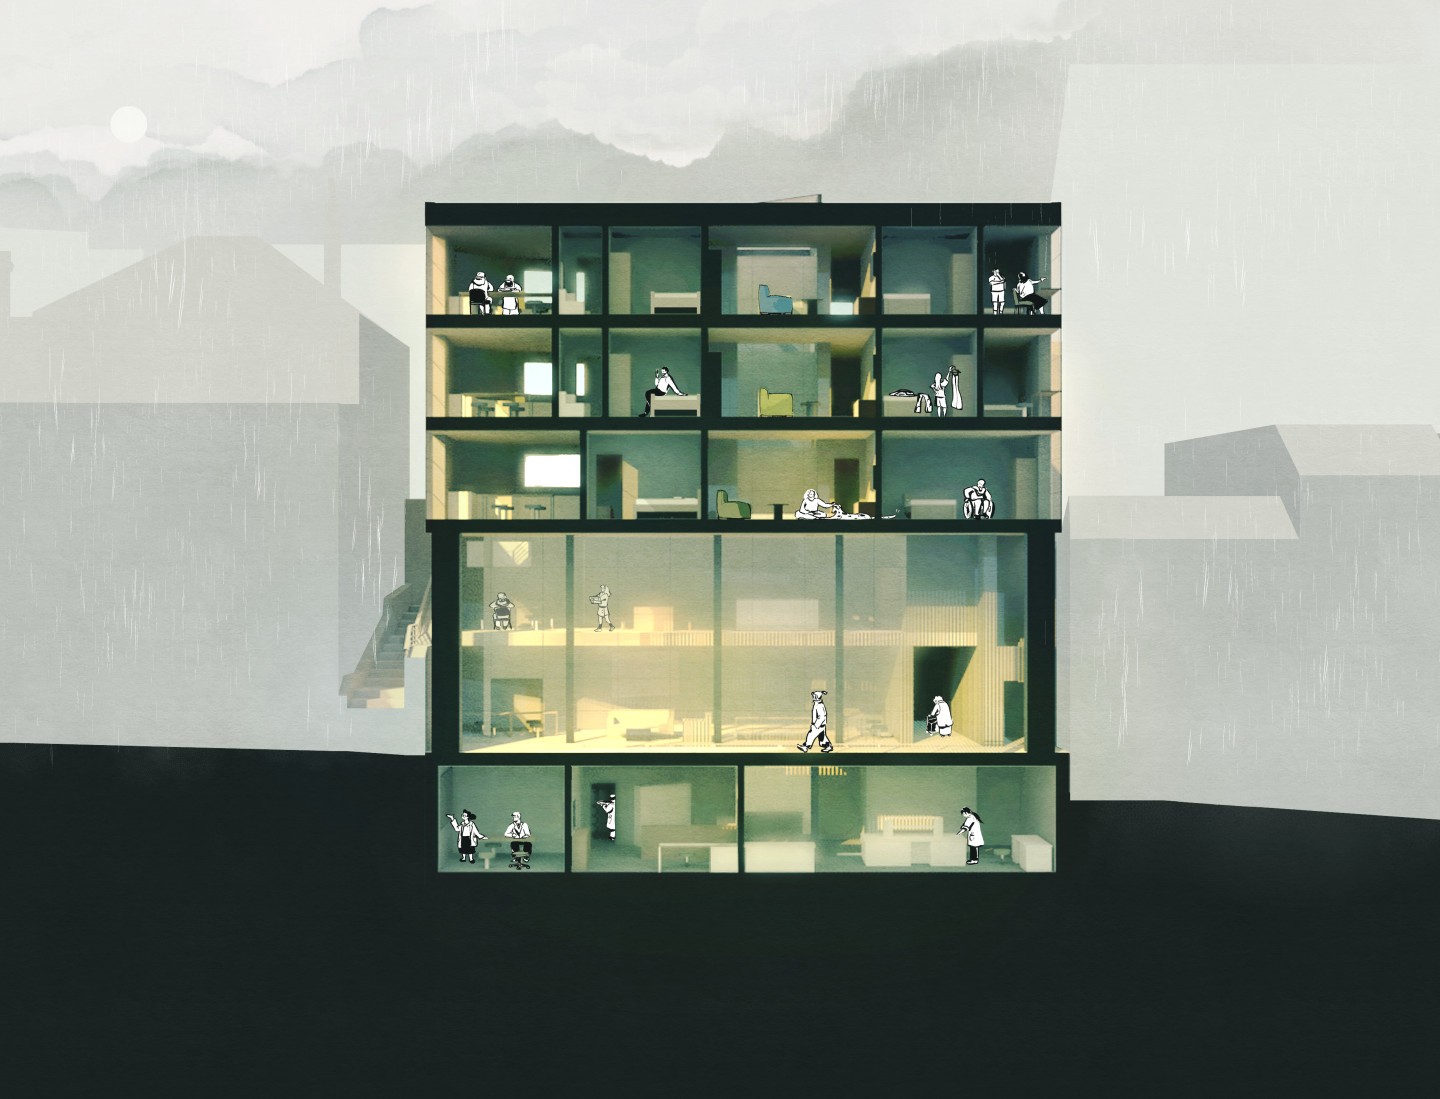 Image of architecture student project 